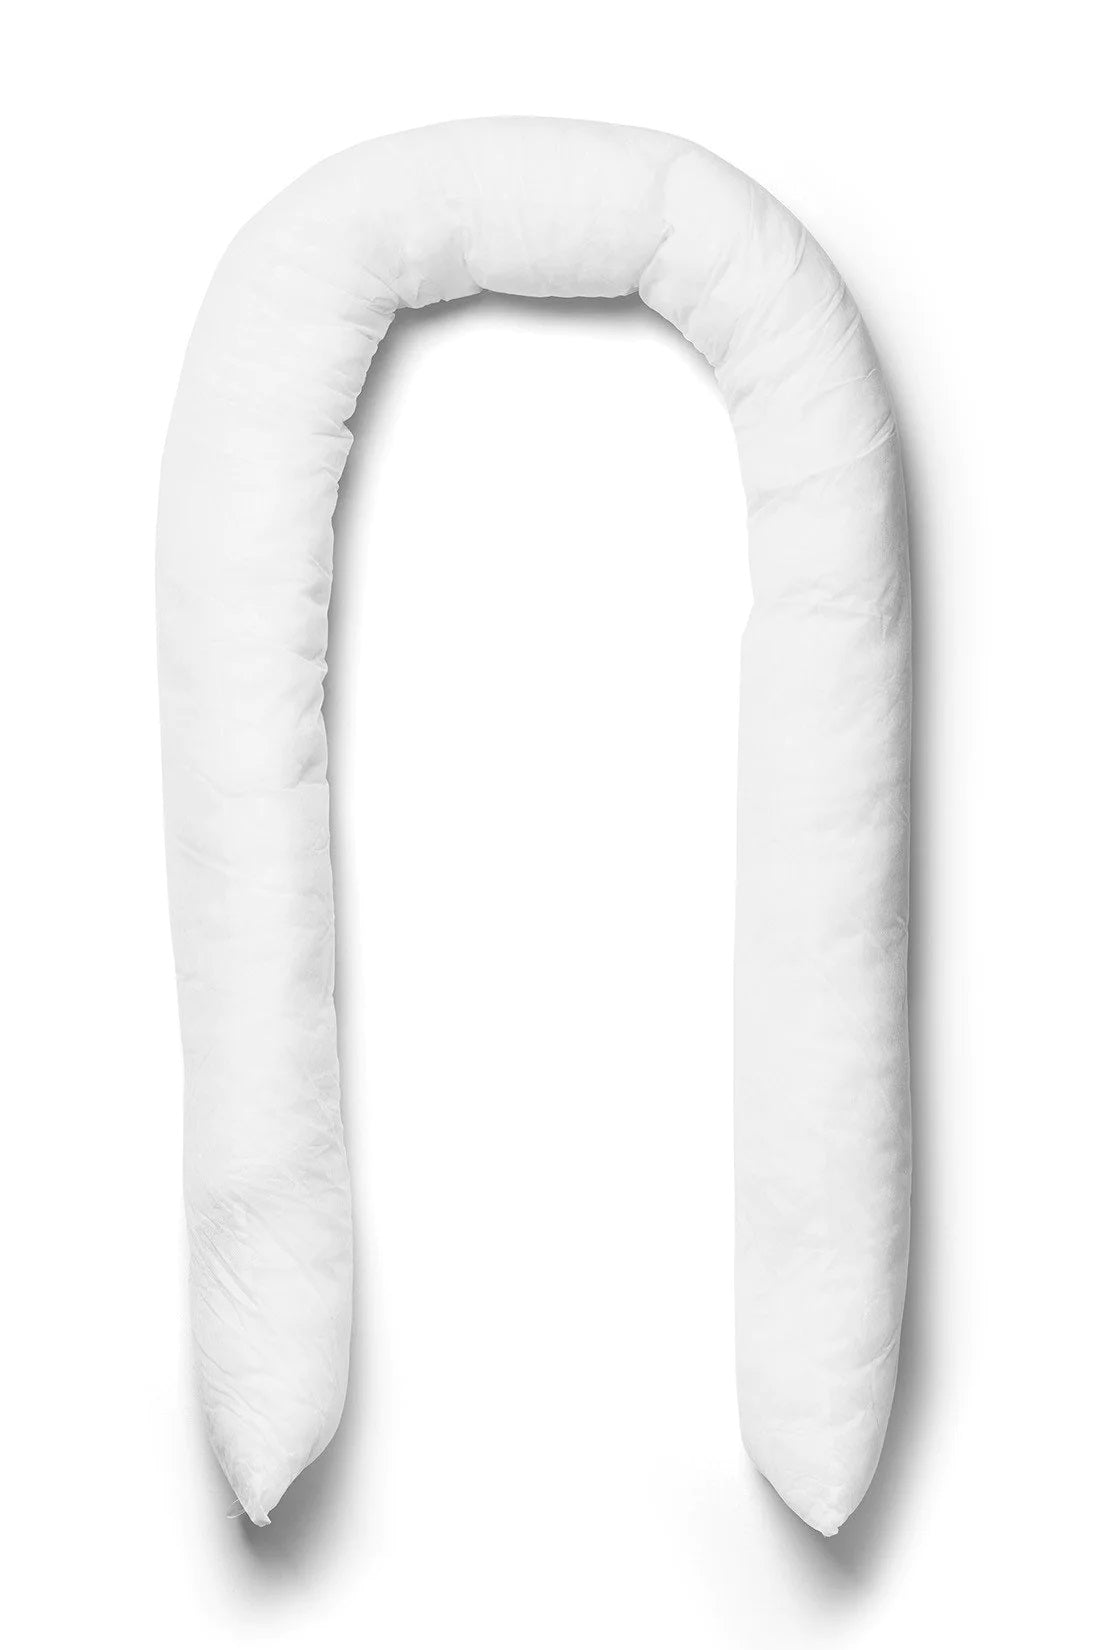 DockATot replacement tube, white color, for Deluxe+ Grand Dock A Tot, front side